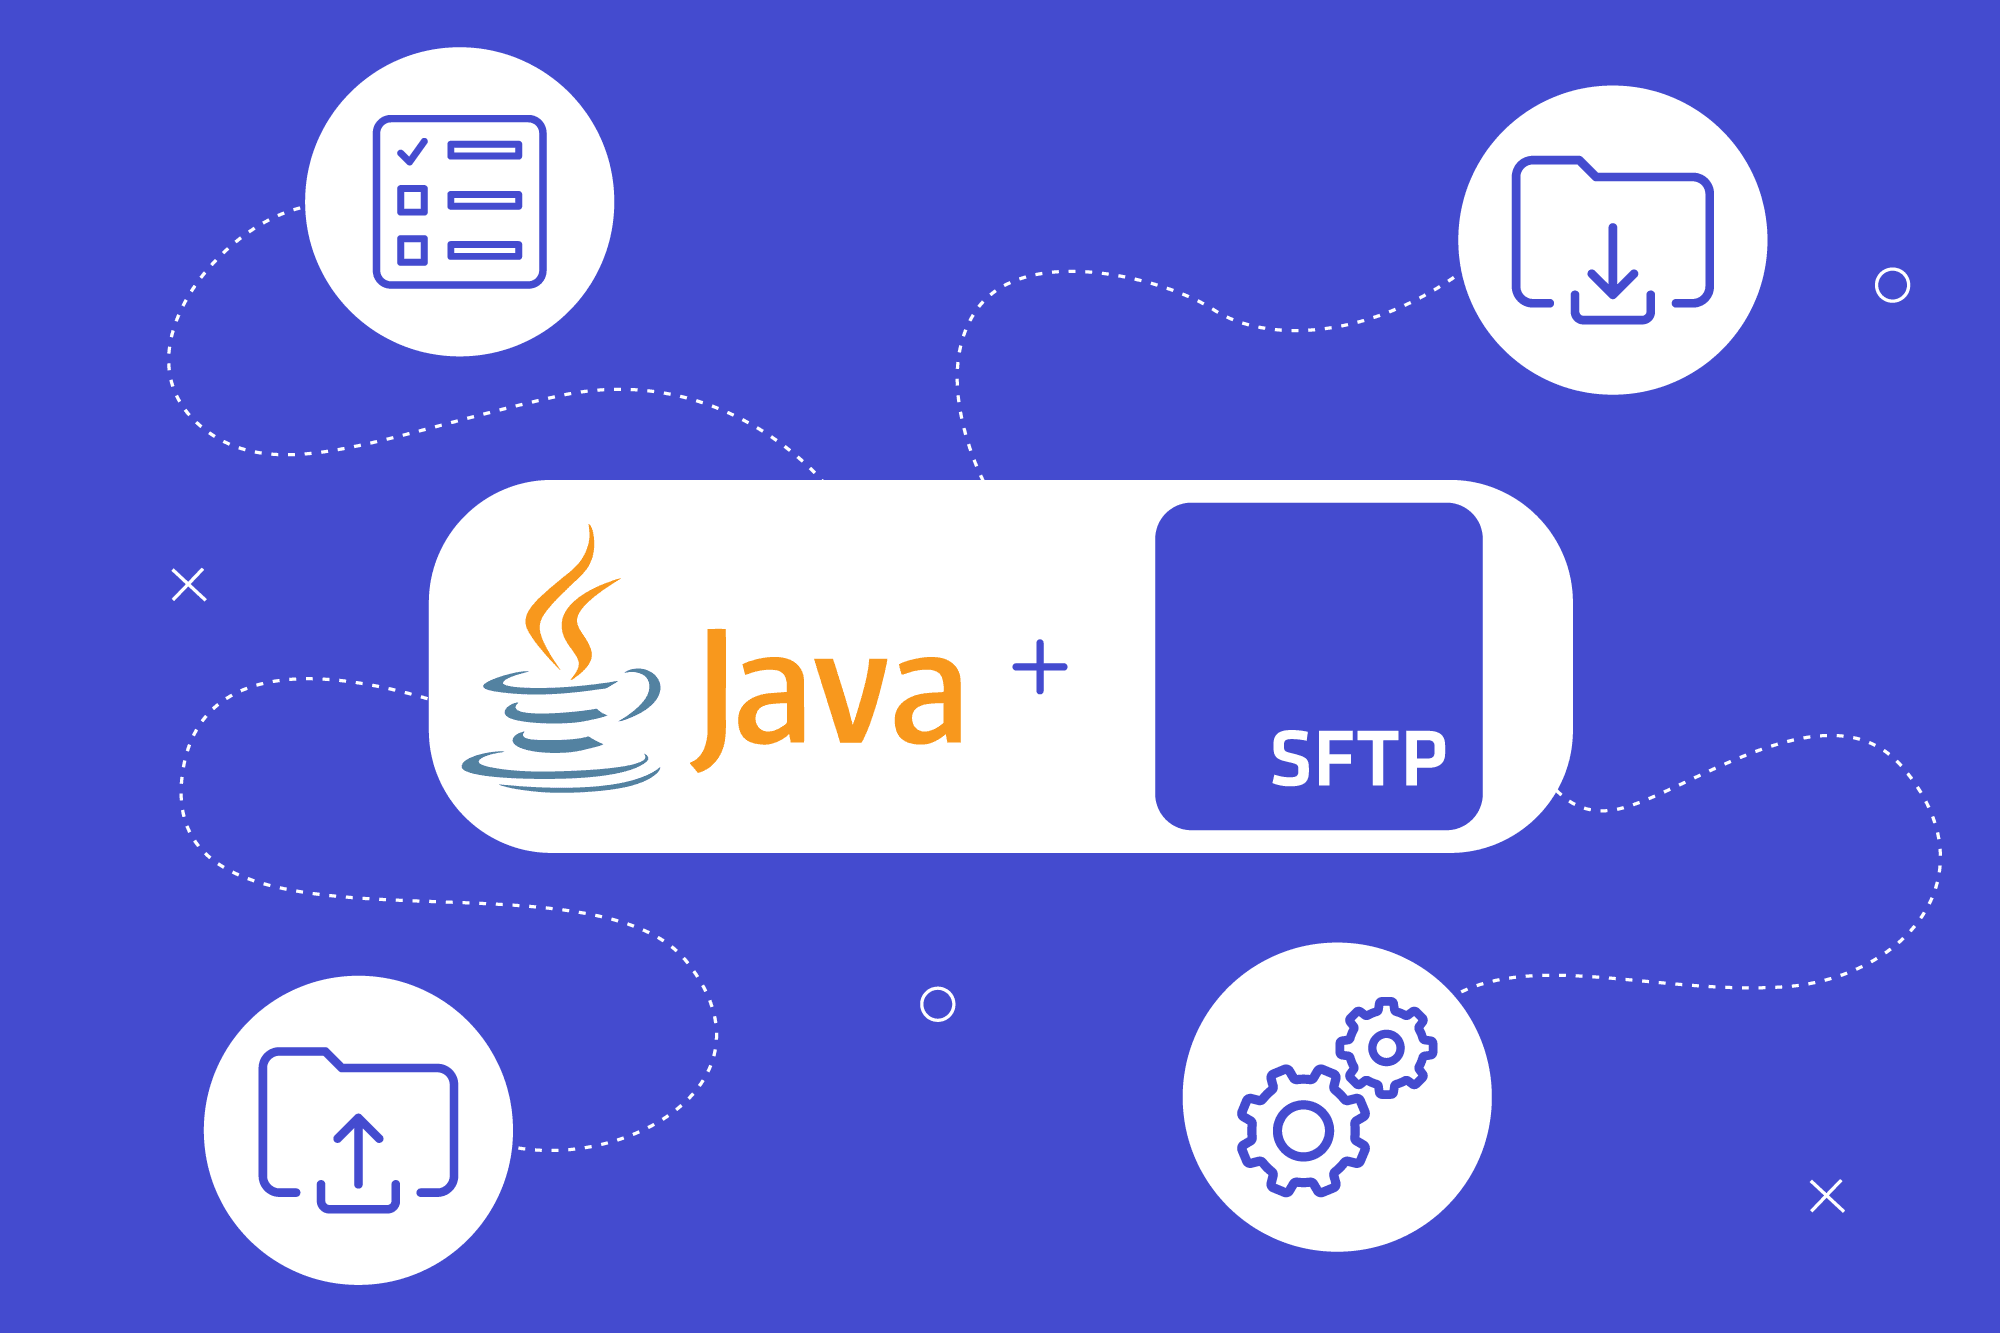 How to connect to SFTP in Java